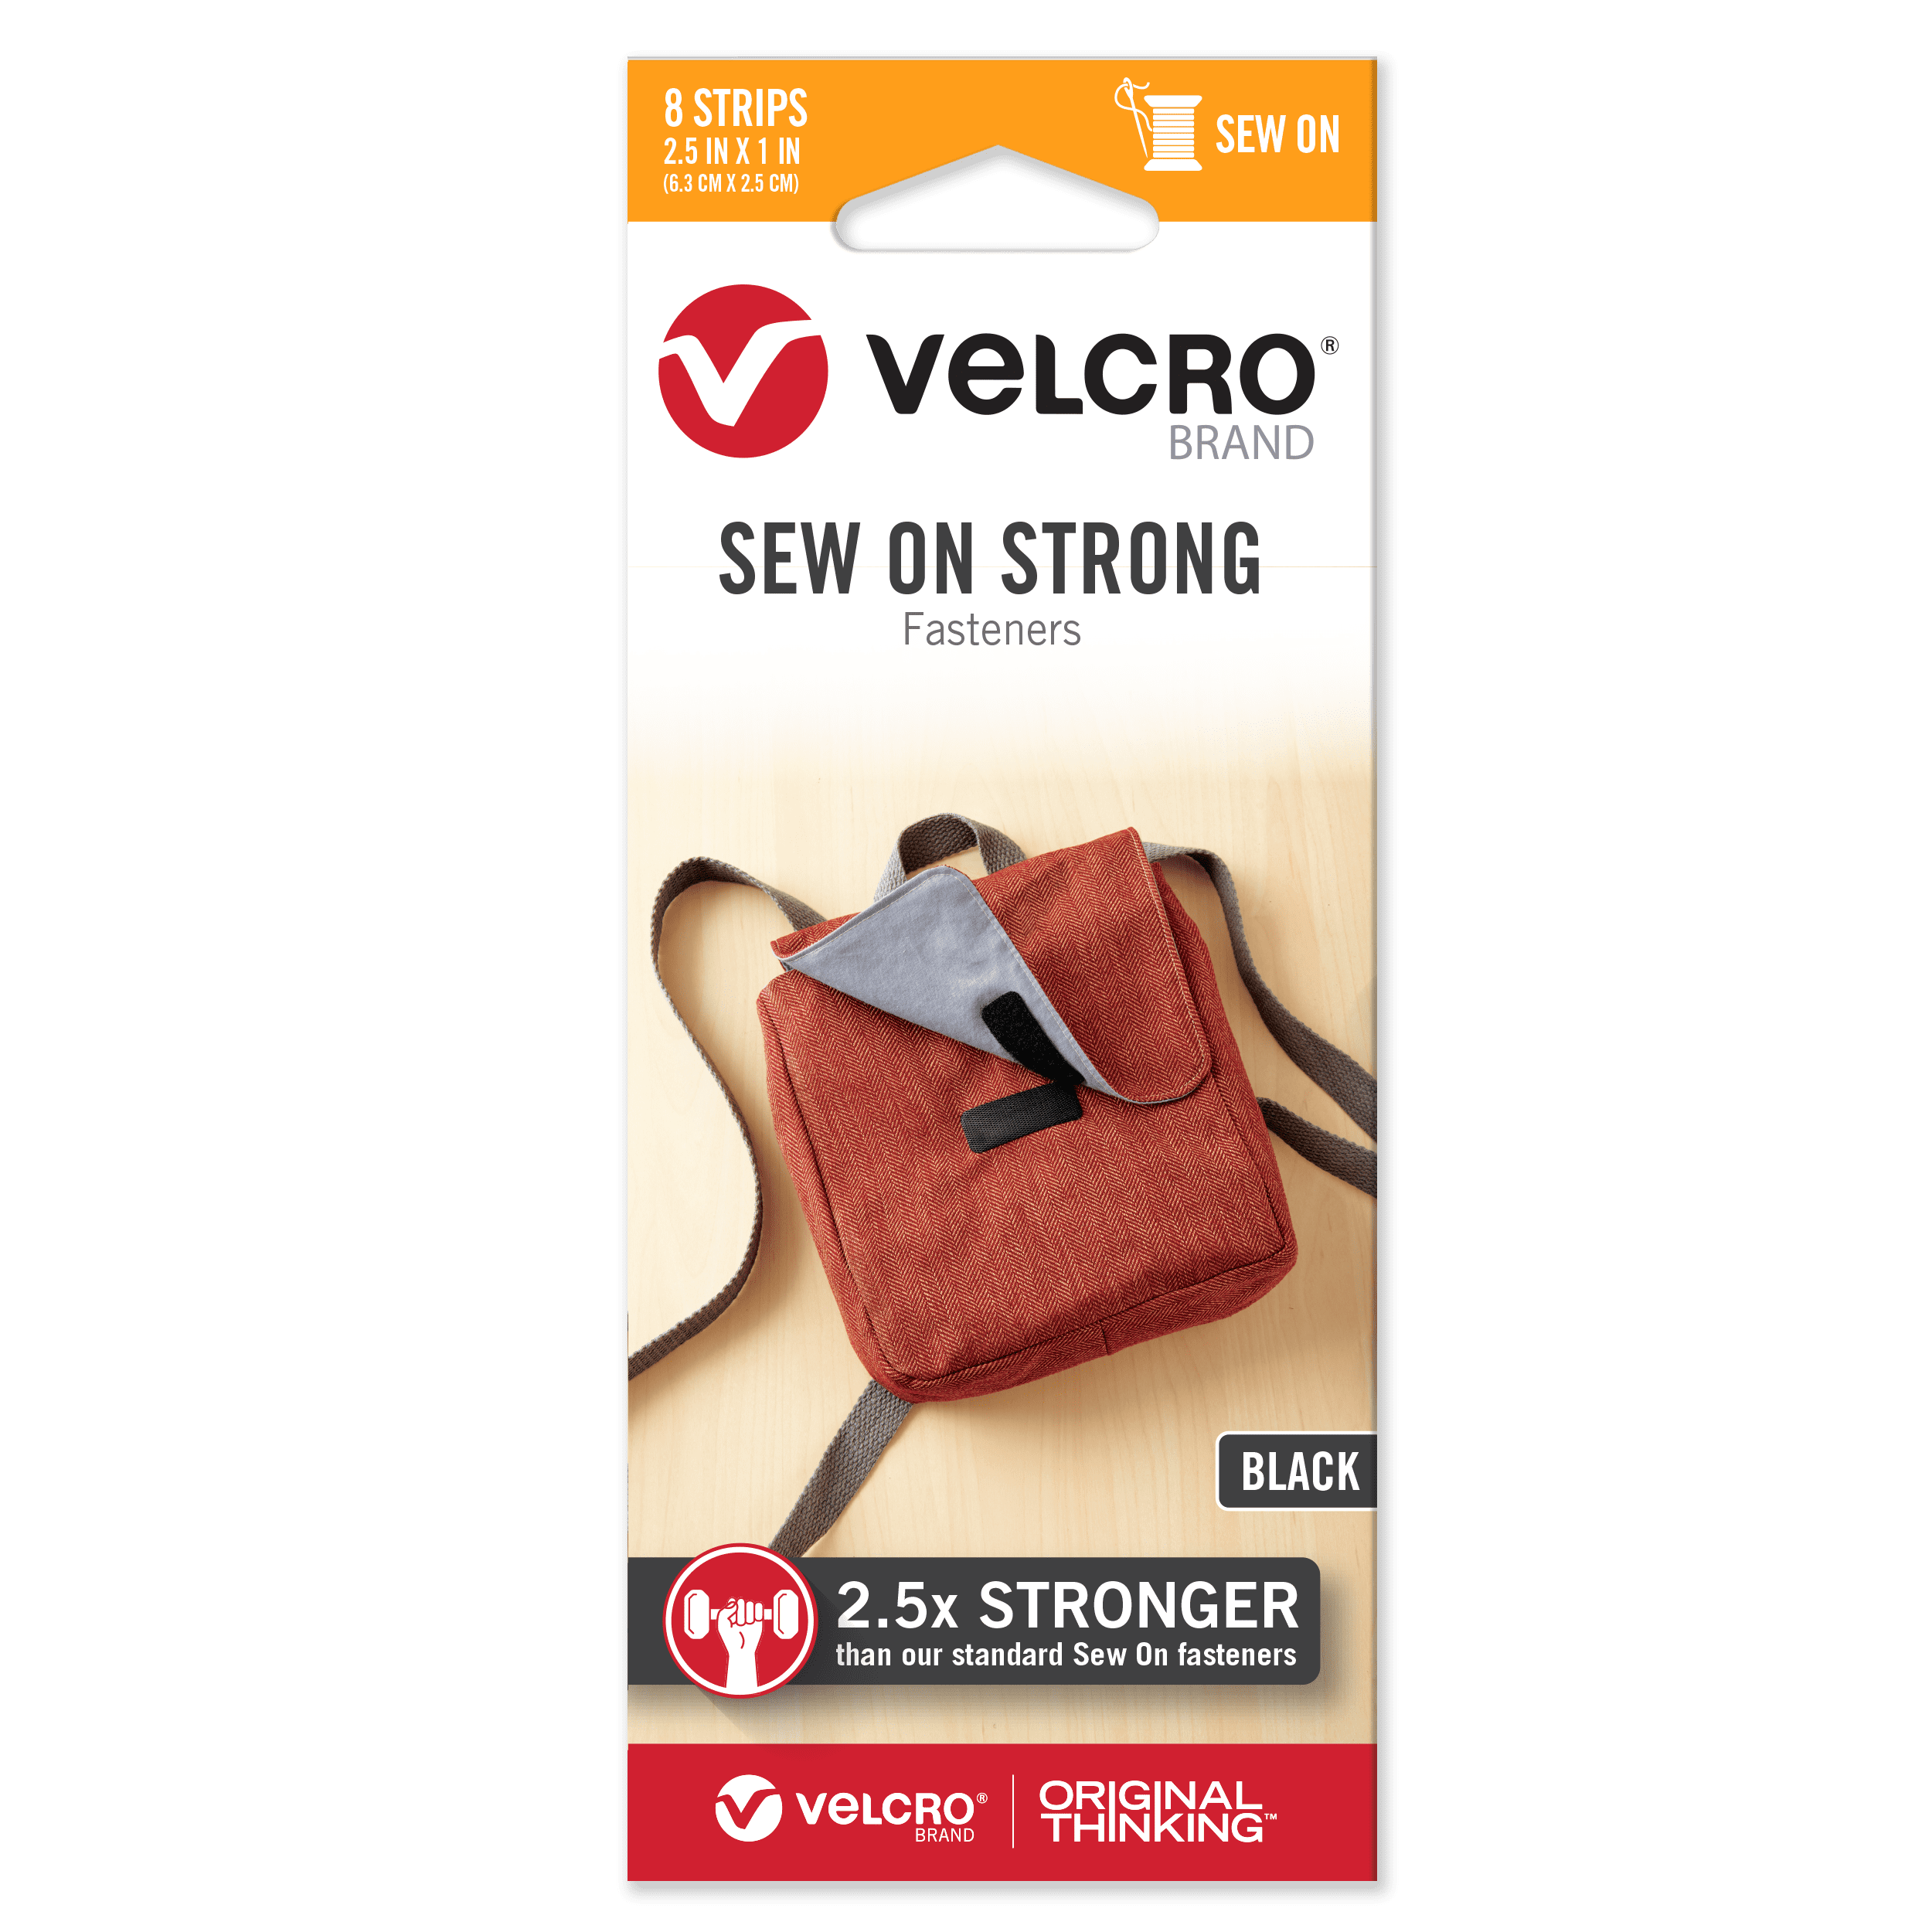 VELCRO Brand Fasteners | Sew On Soft and Flexible | Convenient Alternative  to Snaps Buttons and Zippers | 30in x 5/8in Tape | Black